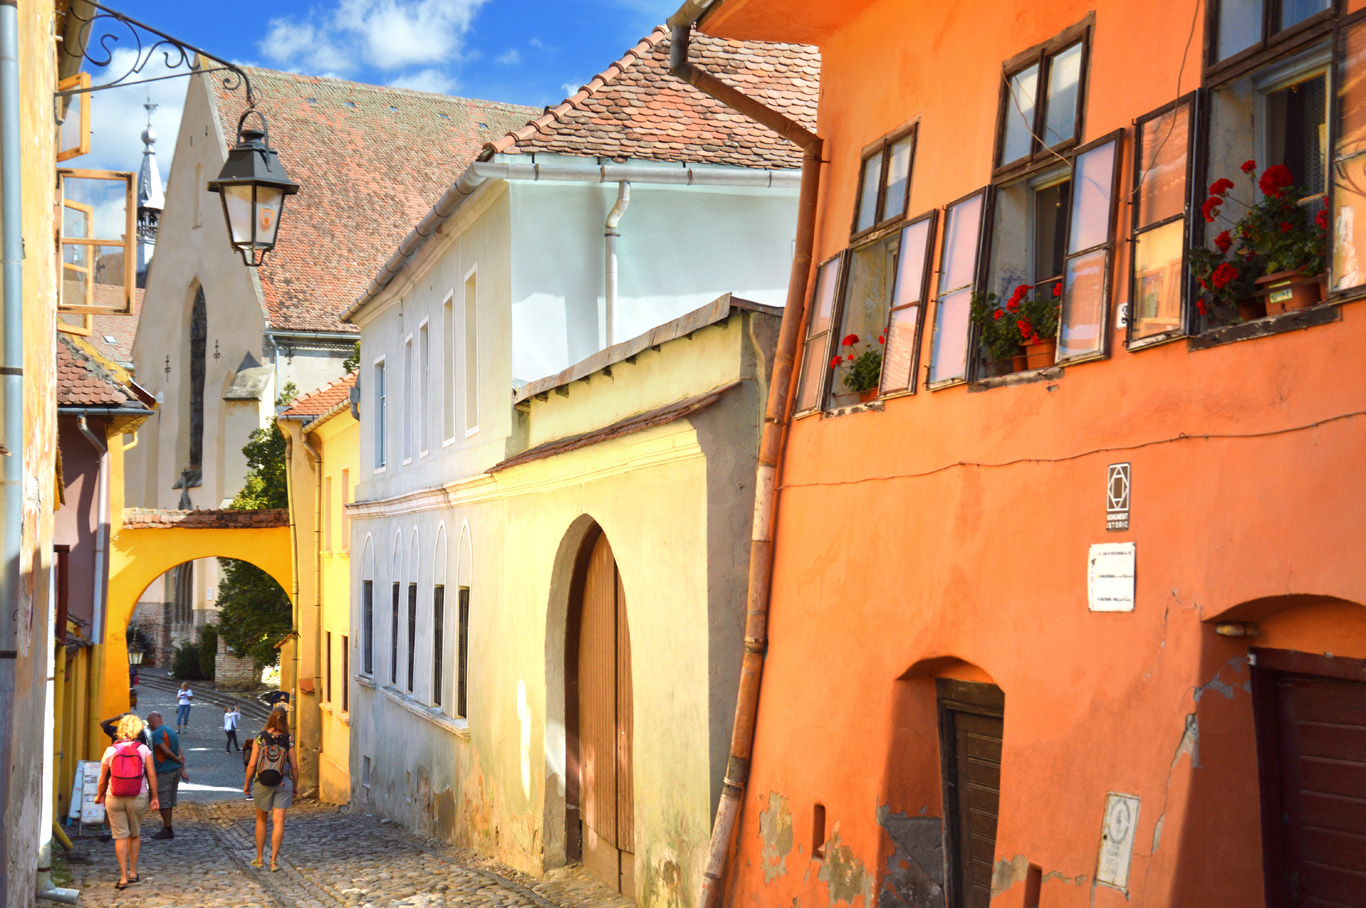   Colorful Sighisoara    more info  